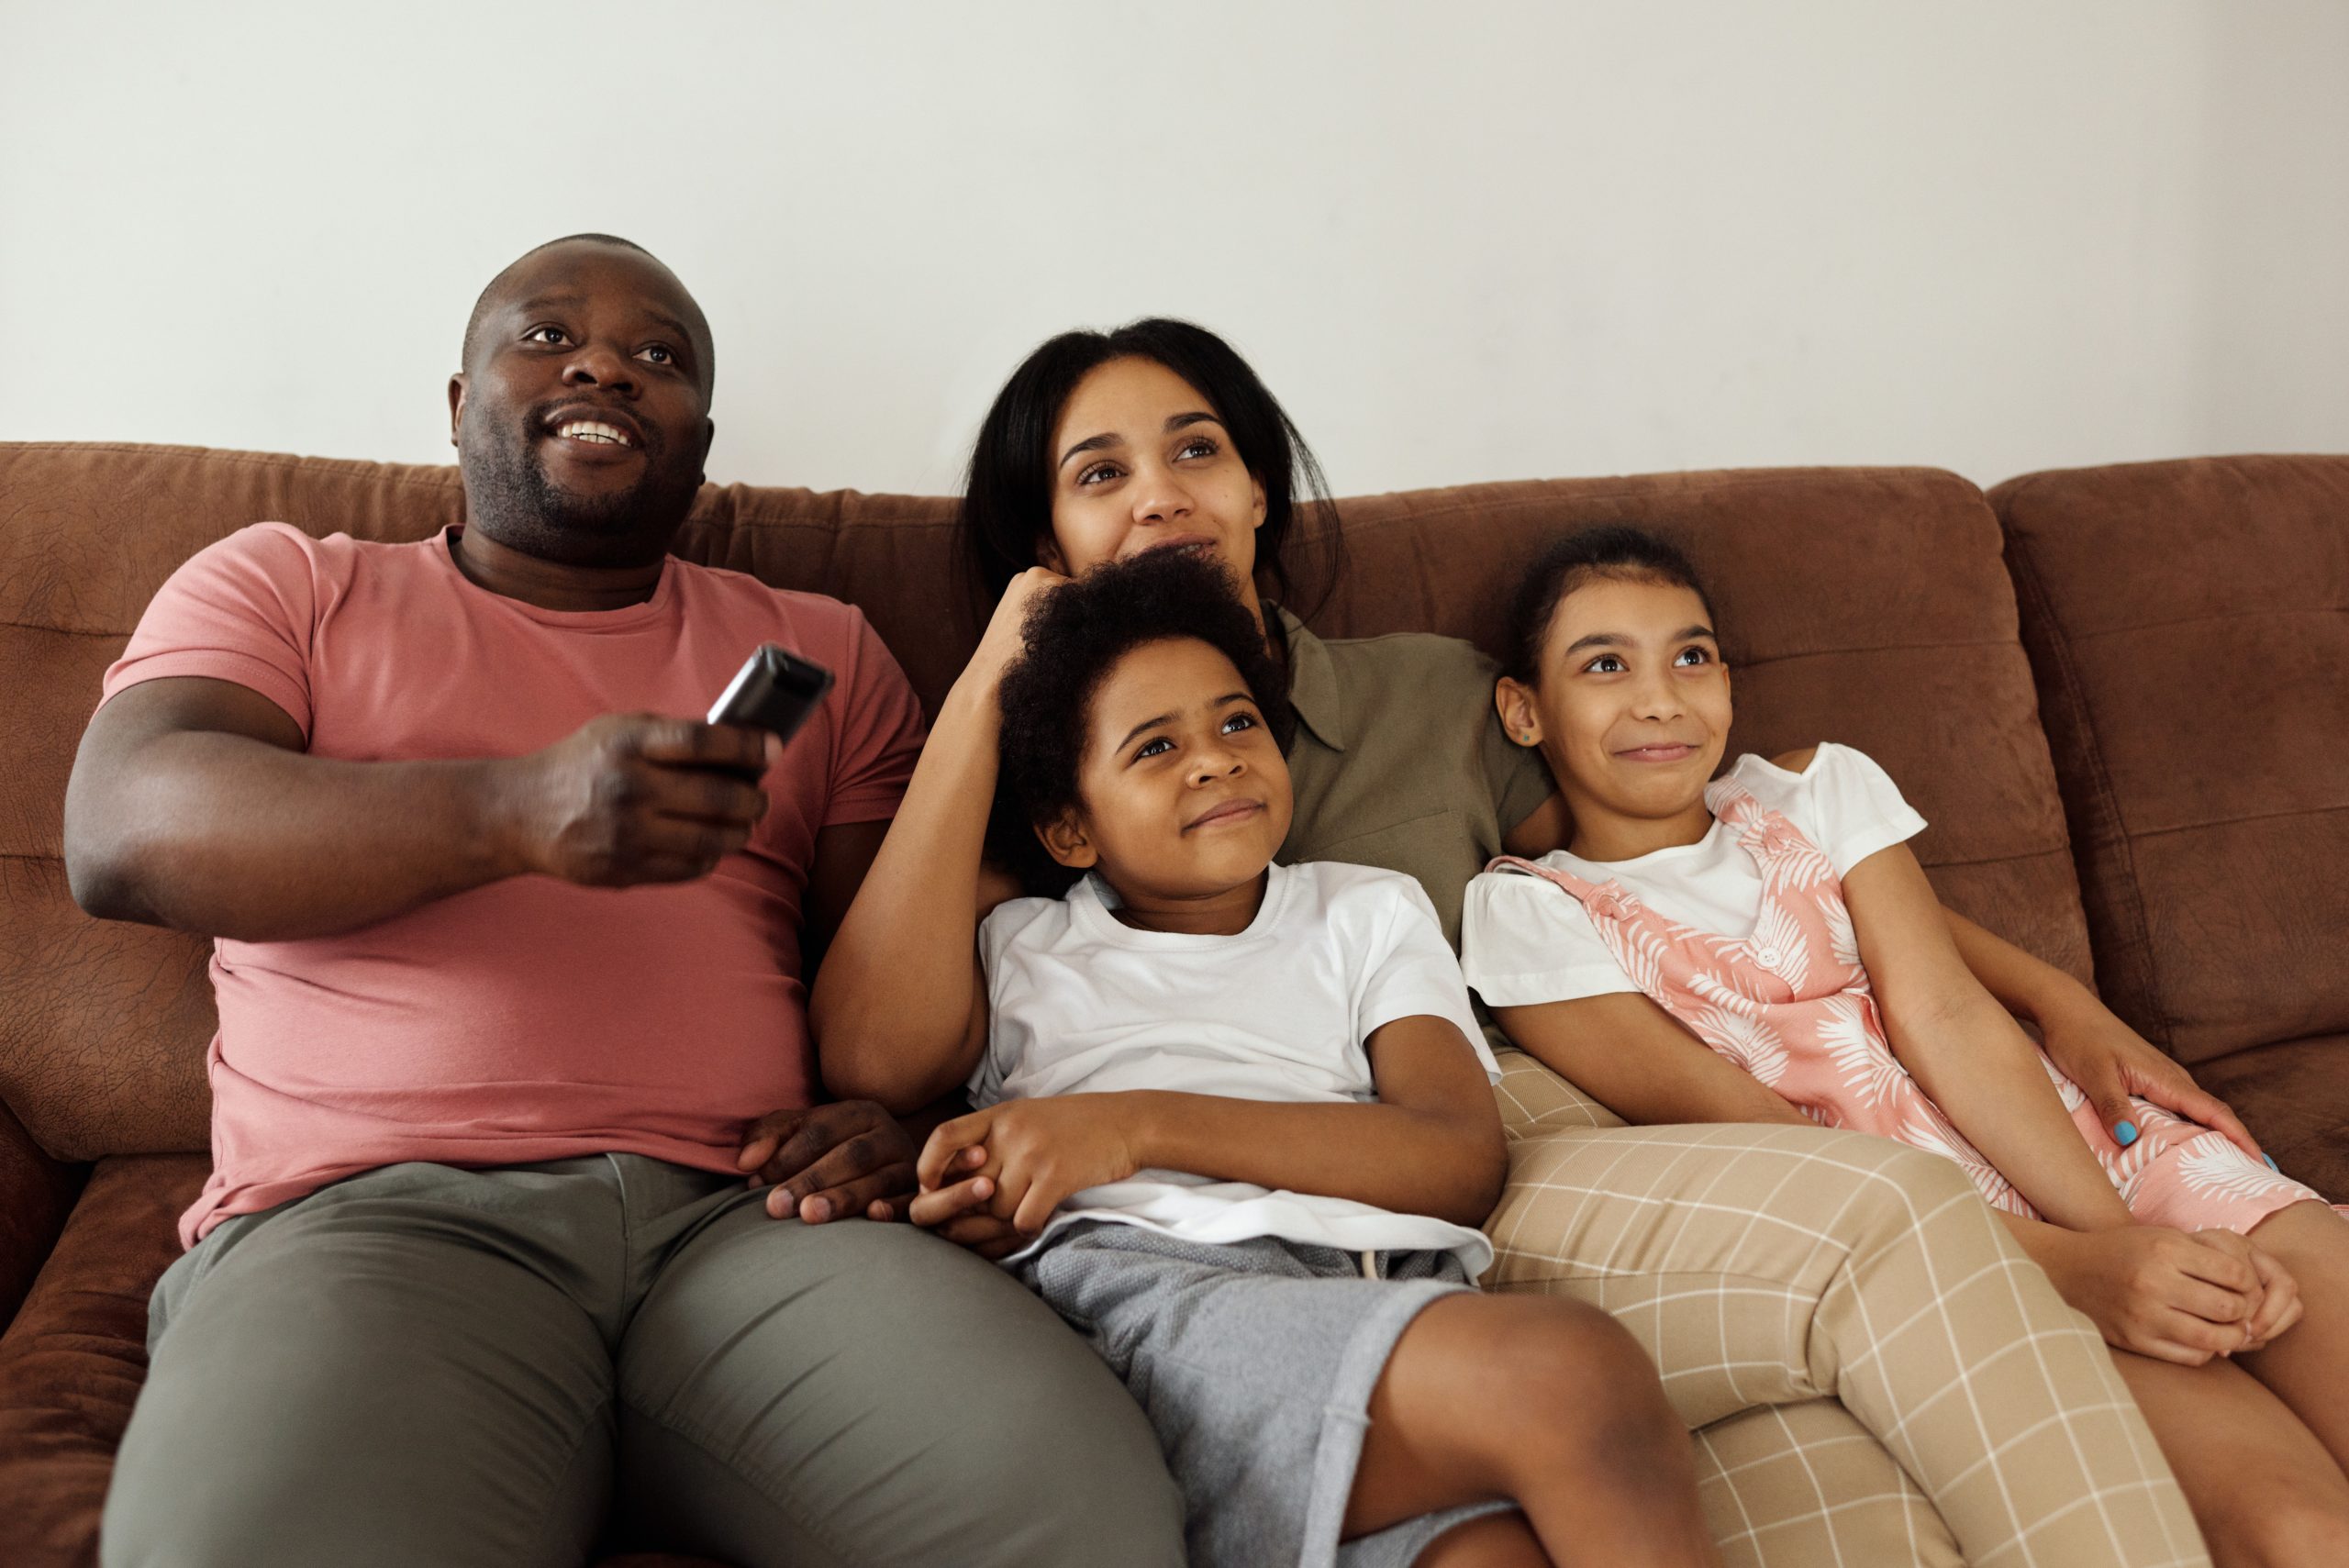 Cuddle up with the kids as you watch your favorite scary Disney films. Our vacation homes come with several T.V.s and living rooms.